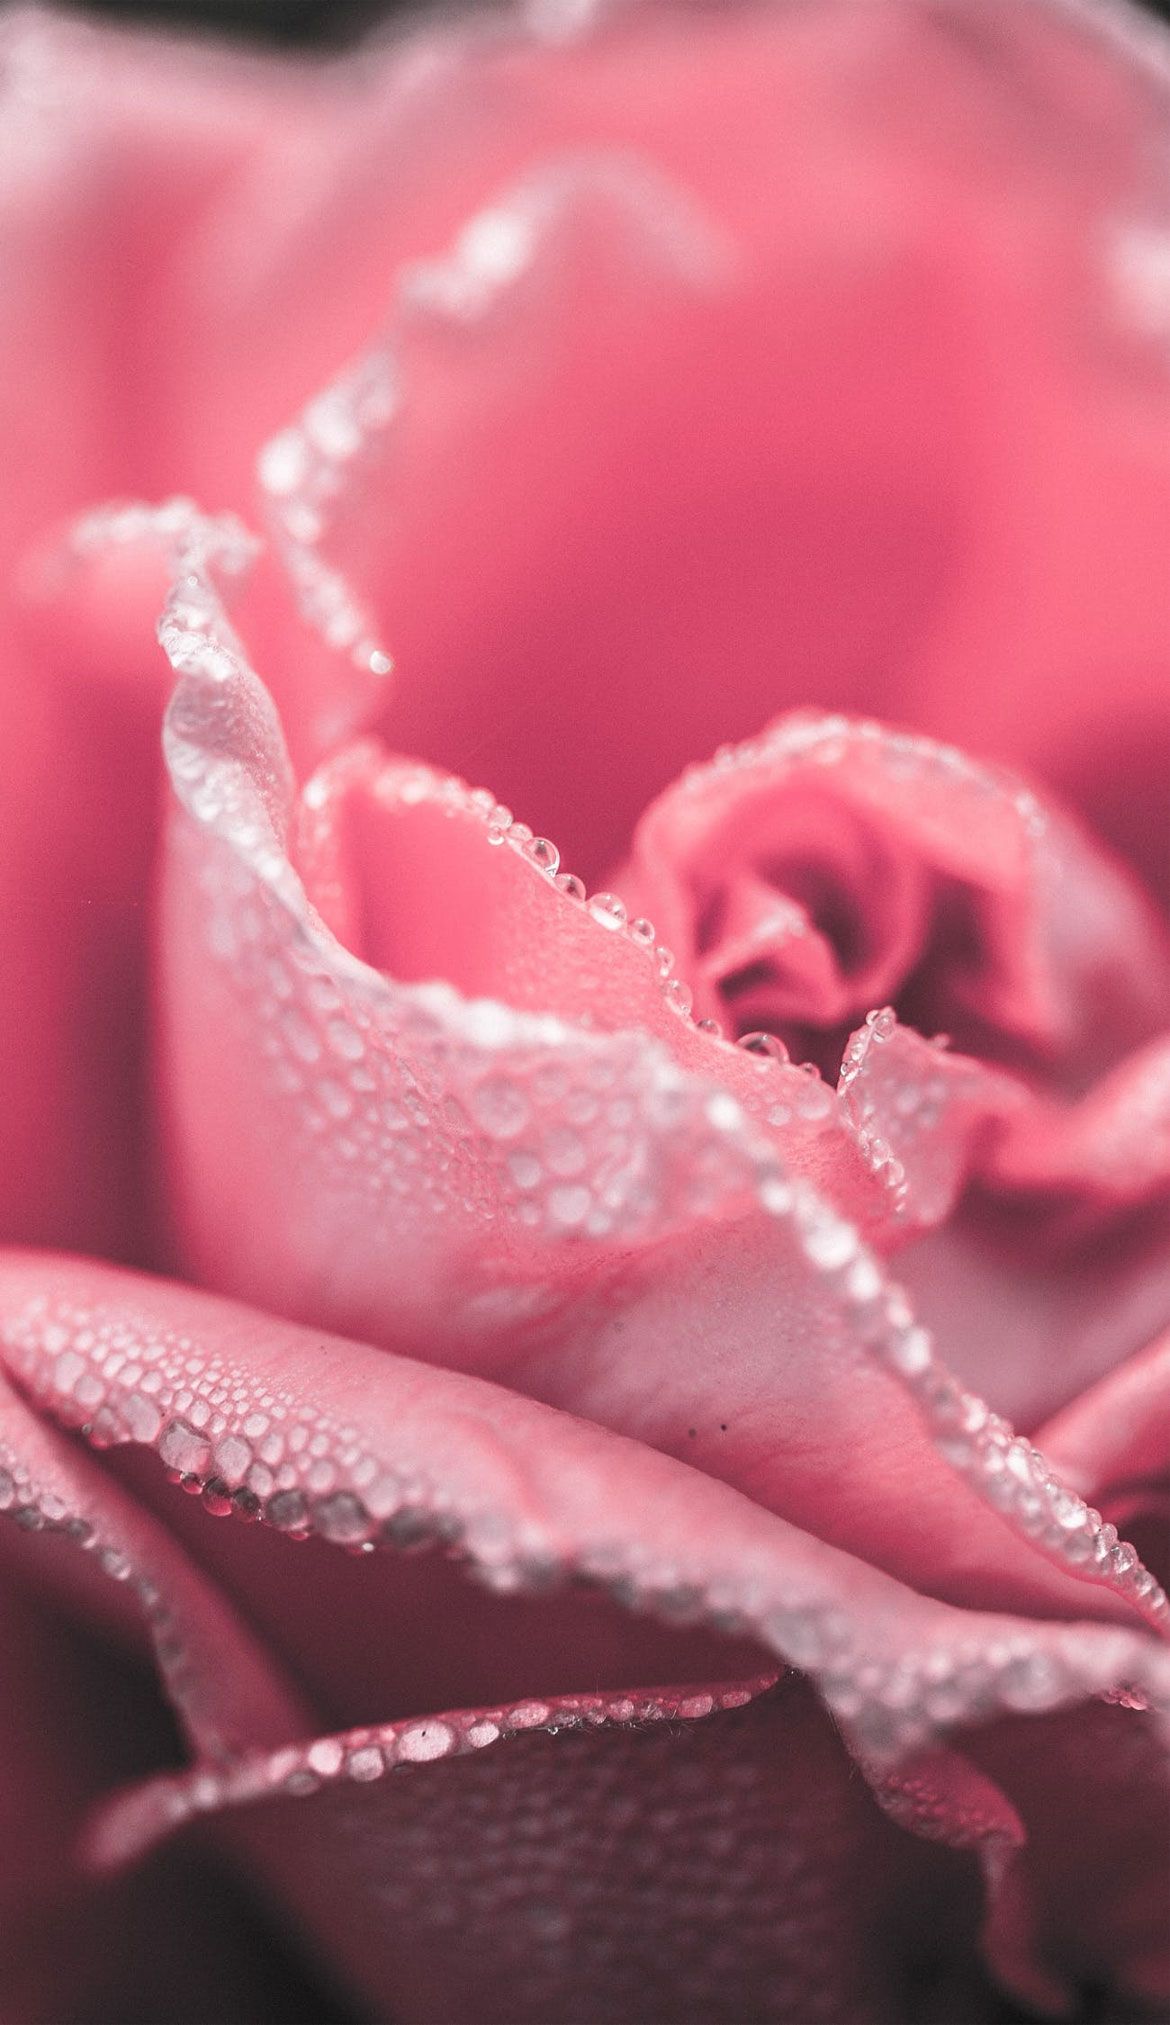 A close up of a pink rose with water droplets on it - Roses